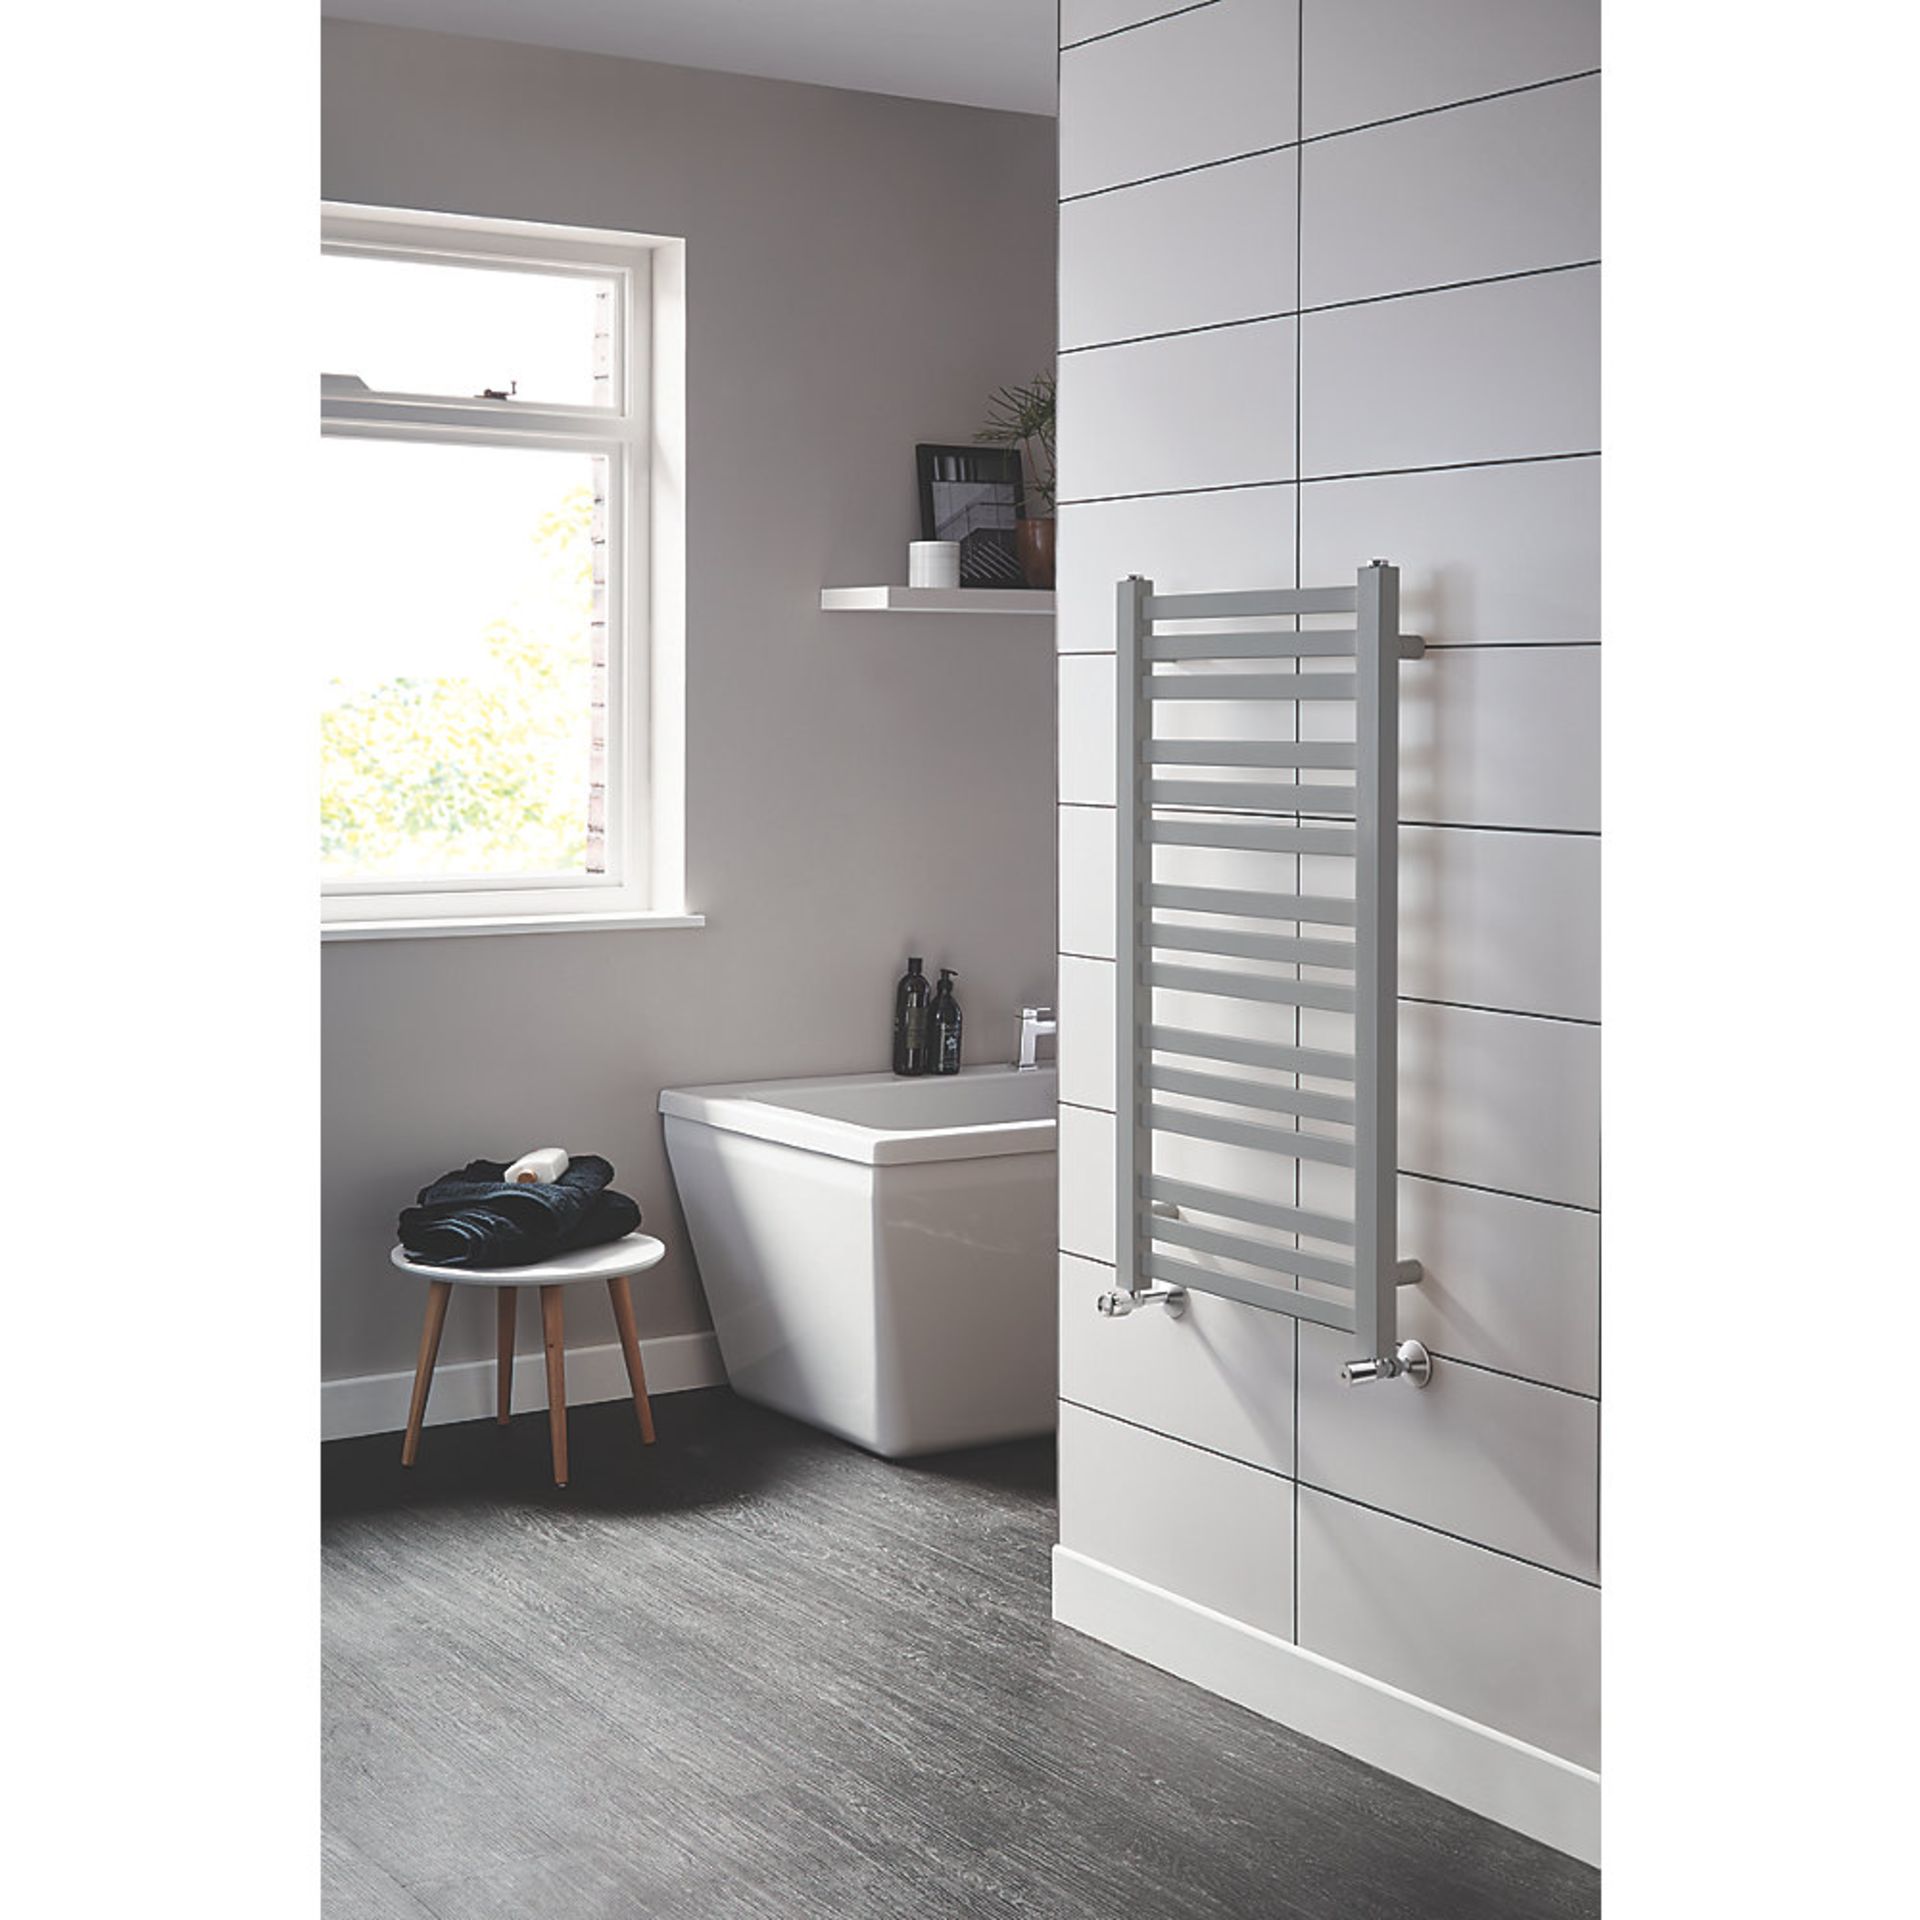 (H29) 900x500mm ANGLED BAR TOWEL RADIATOR SILVER. High quality powder-coated steel construction... - Image 2 of 3